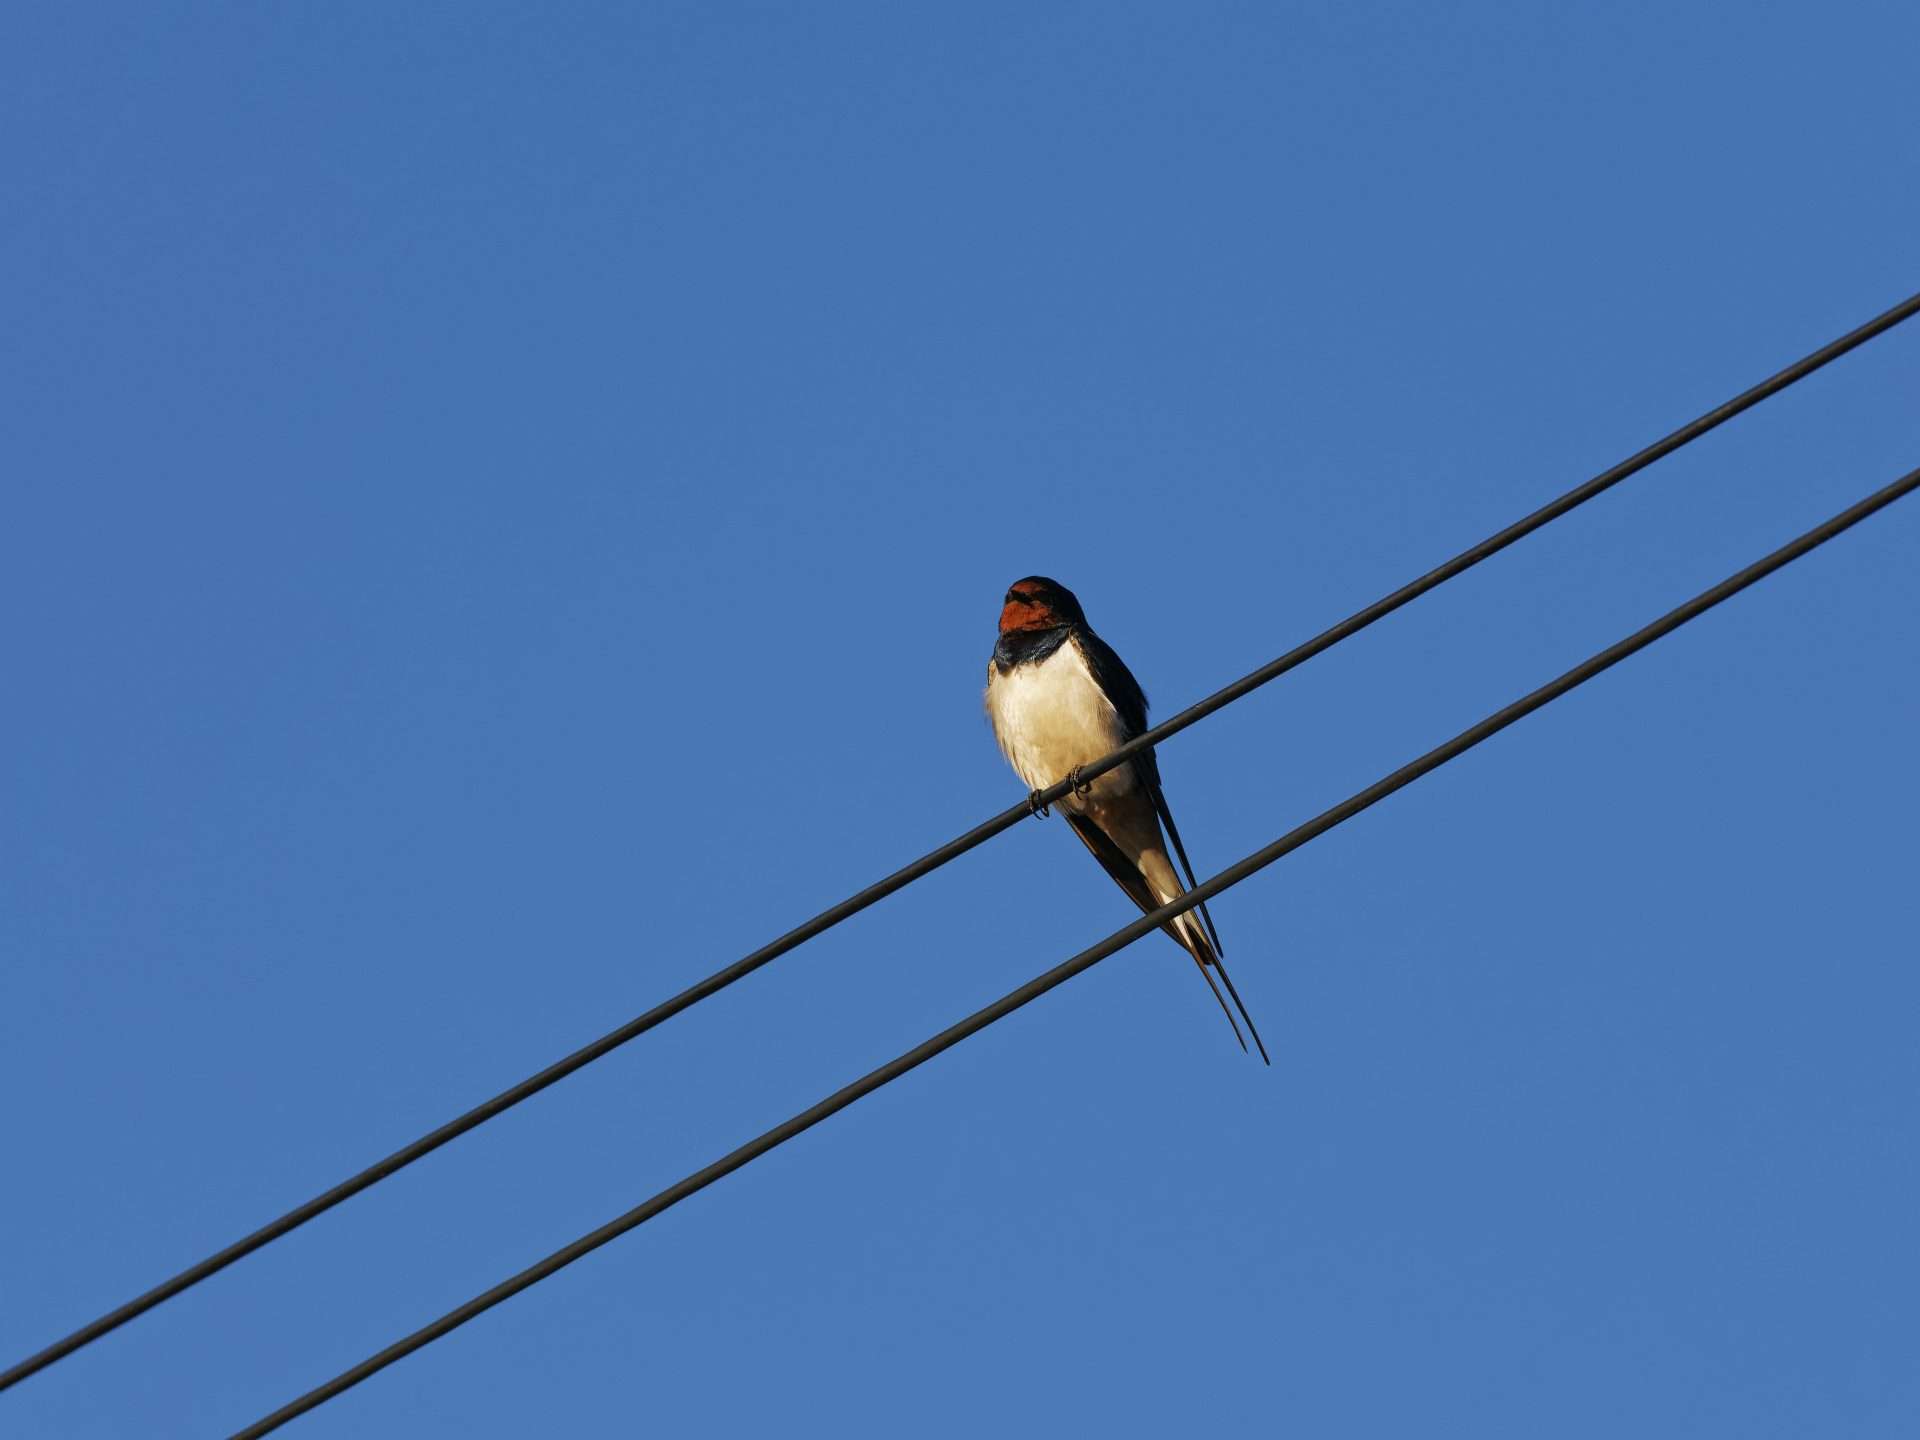 Swallow by swollow at plympton